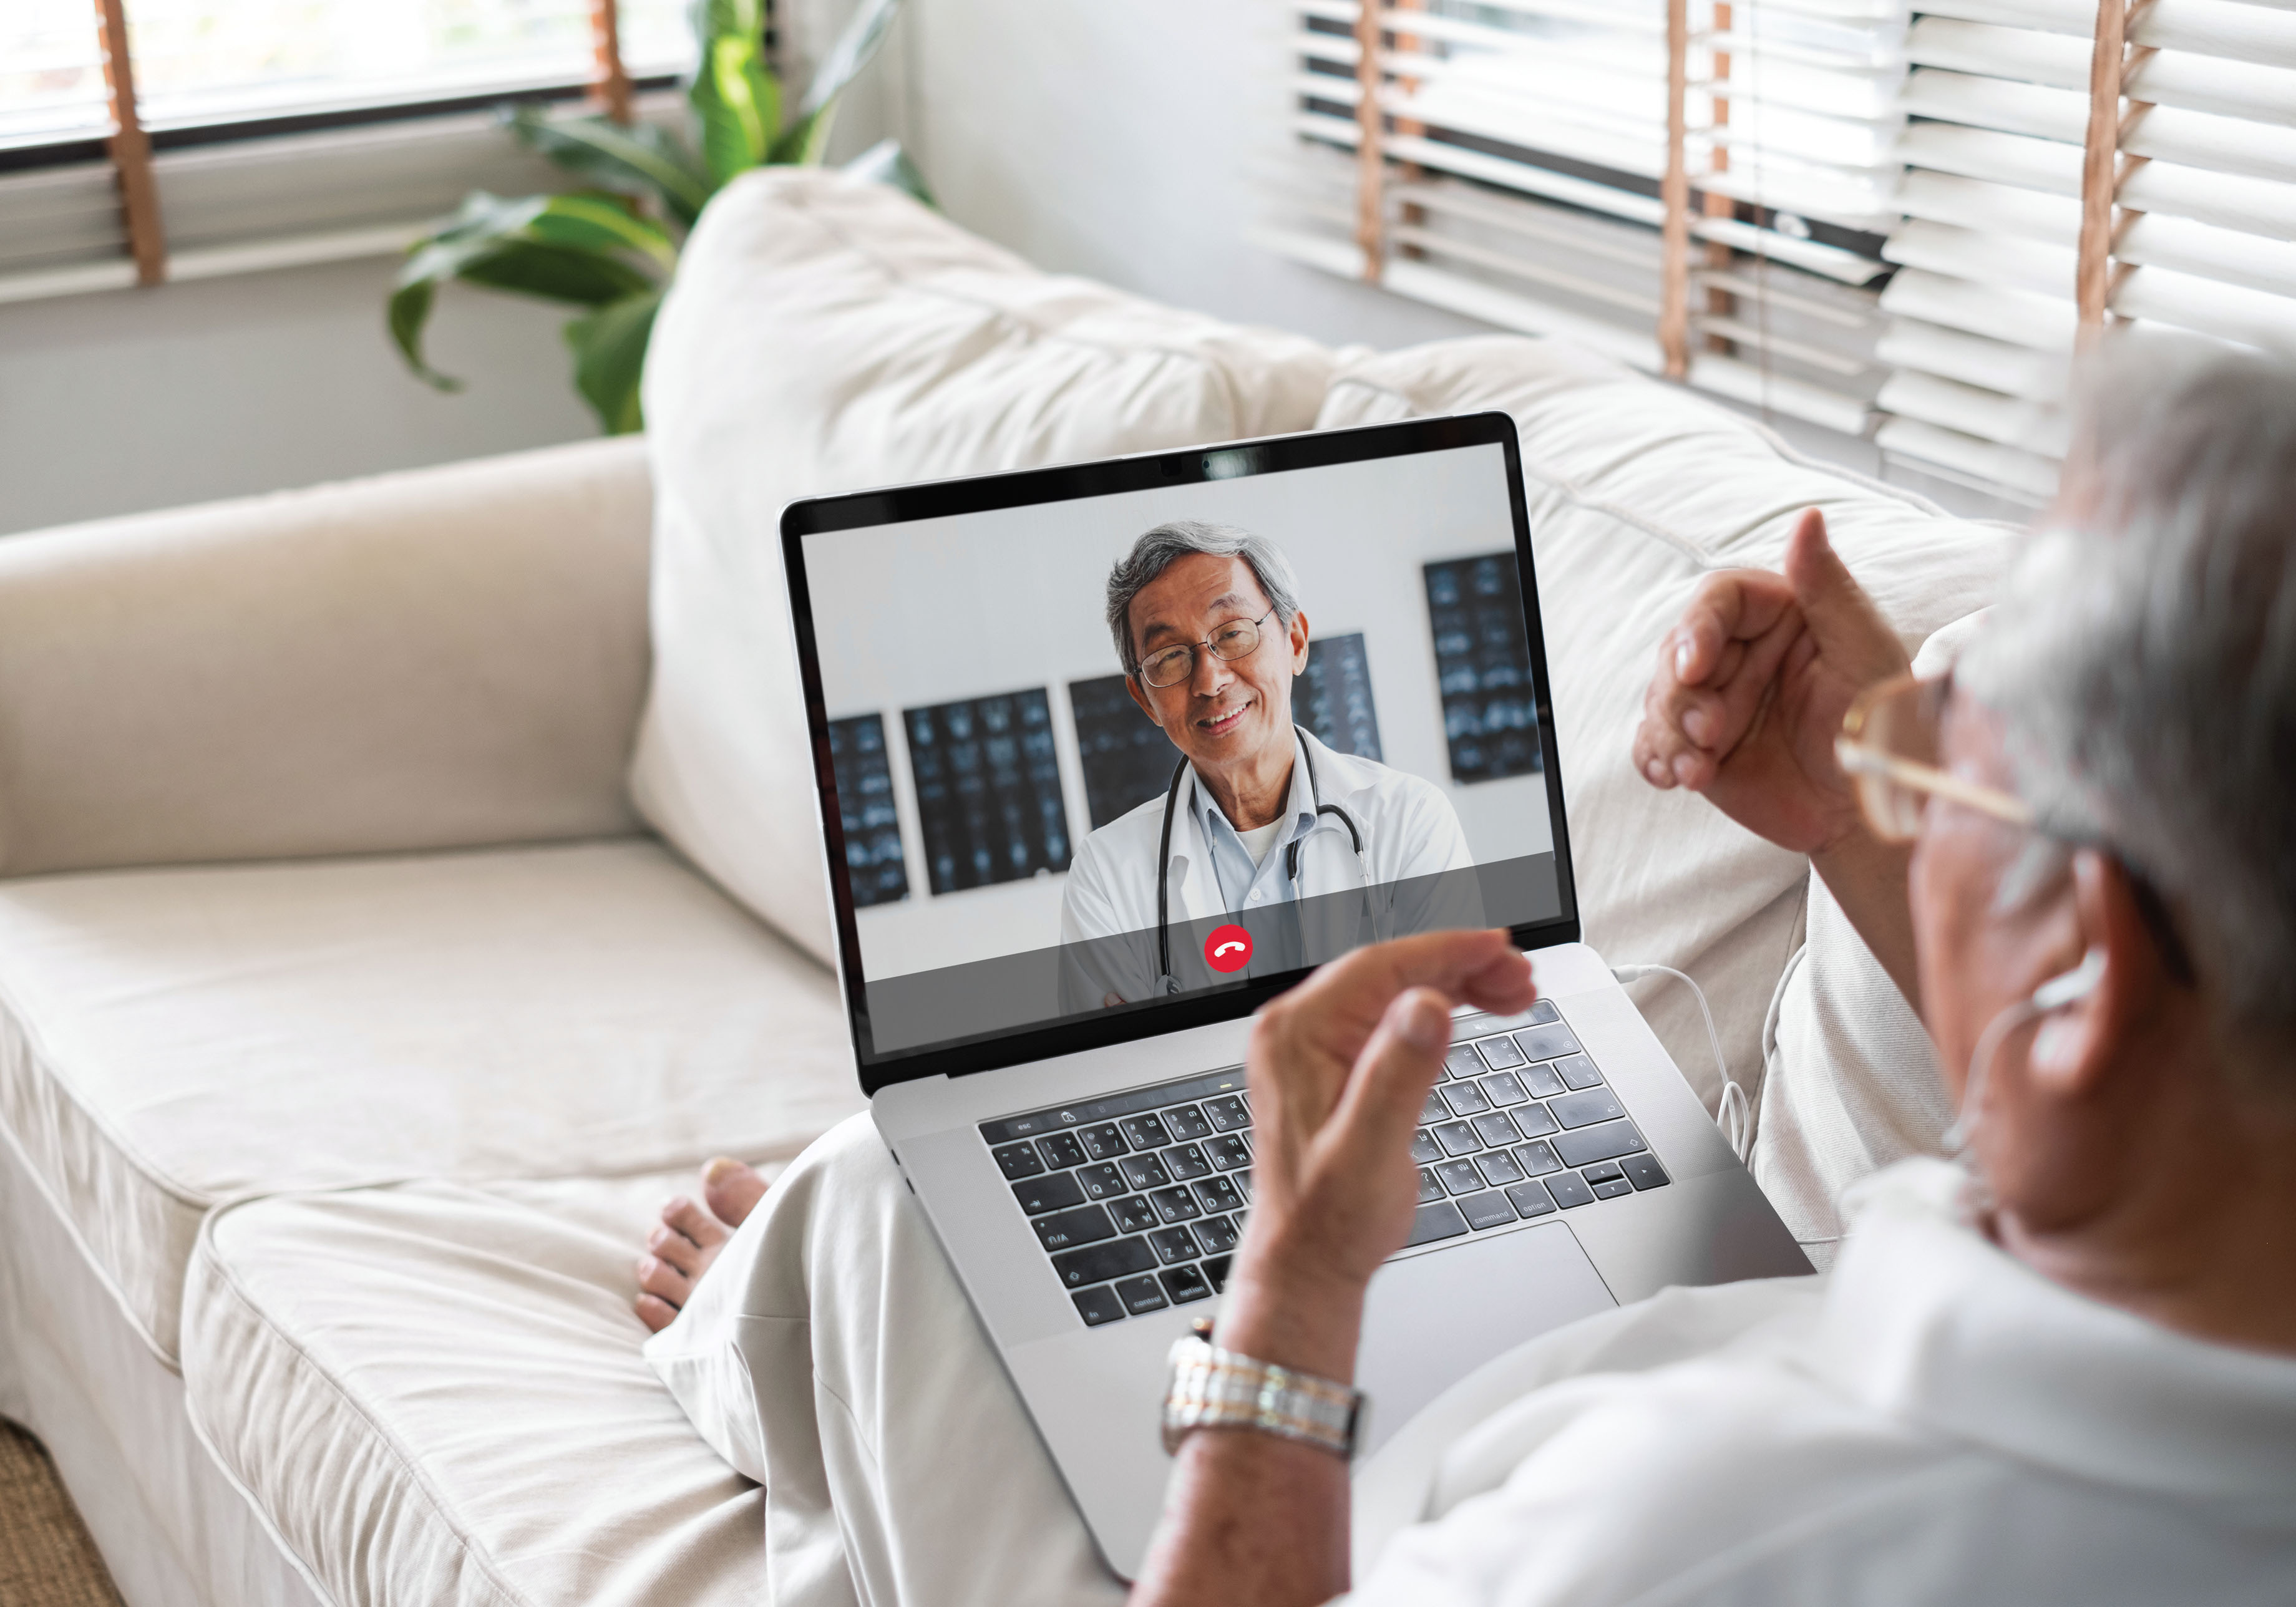 Oncology Nurses Share Successes and Challenges Adapting to Telehealth During COVID-19